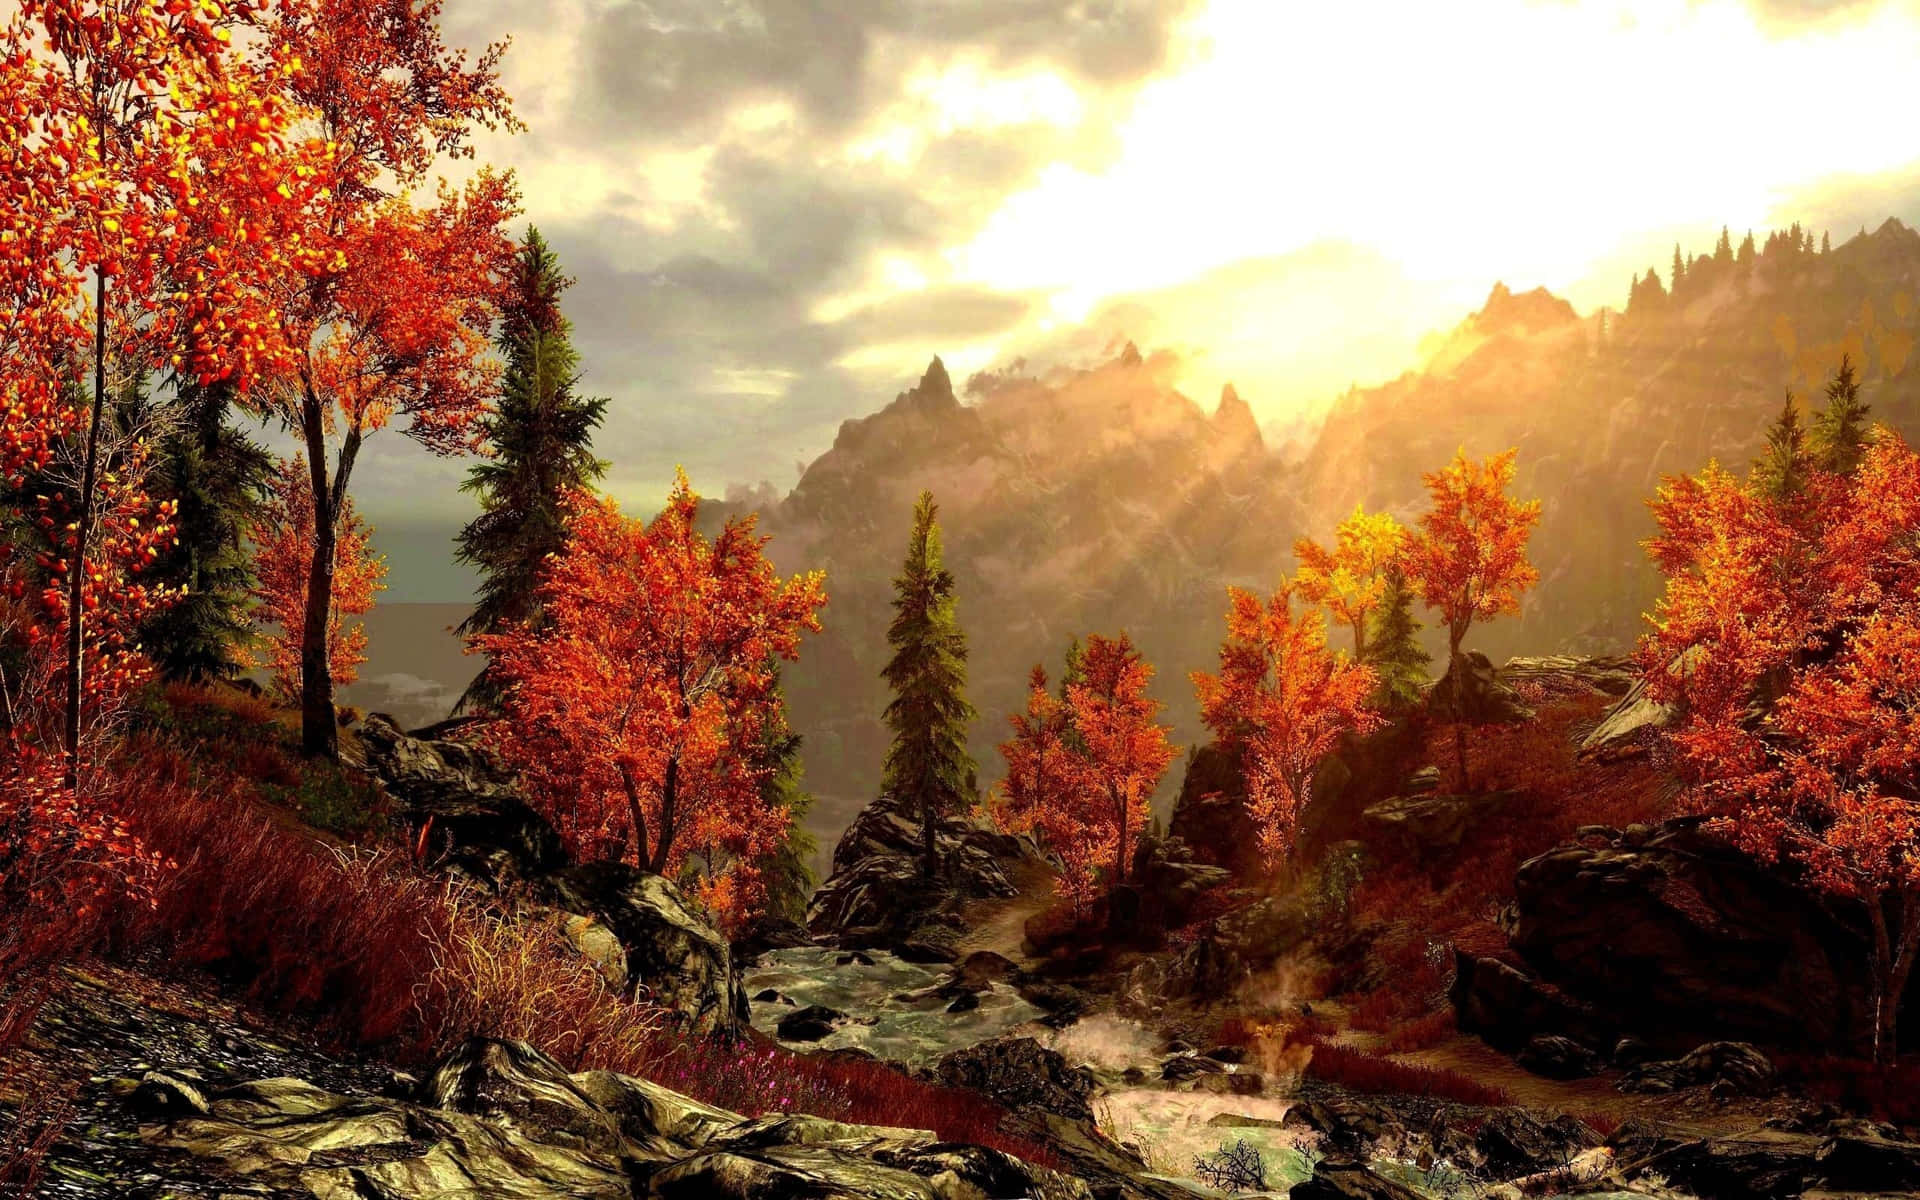 Capture the Cool of a Fall Mountain Wallpaper